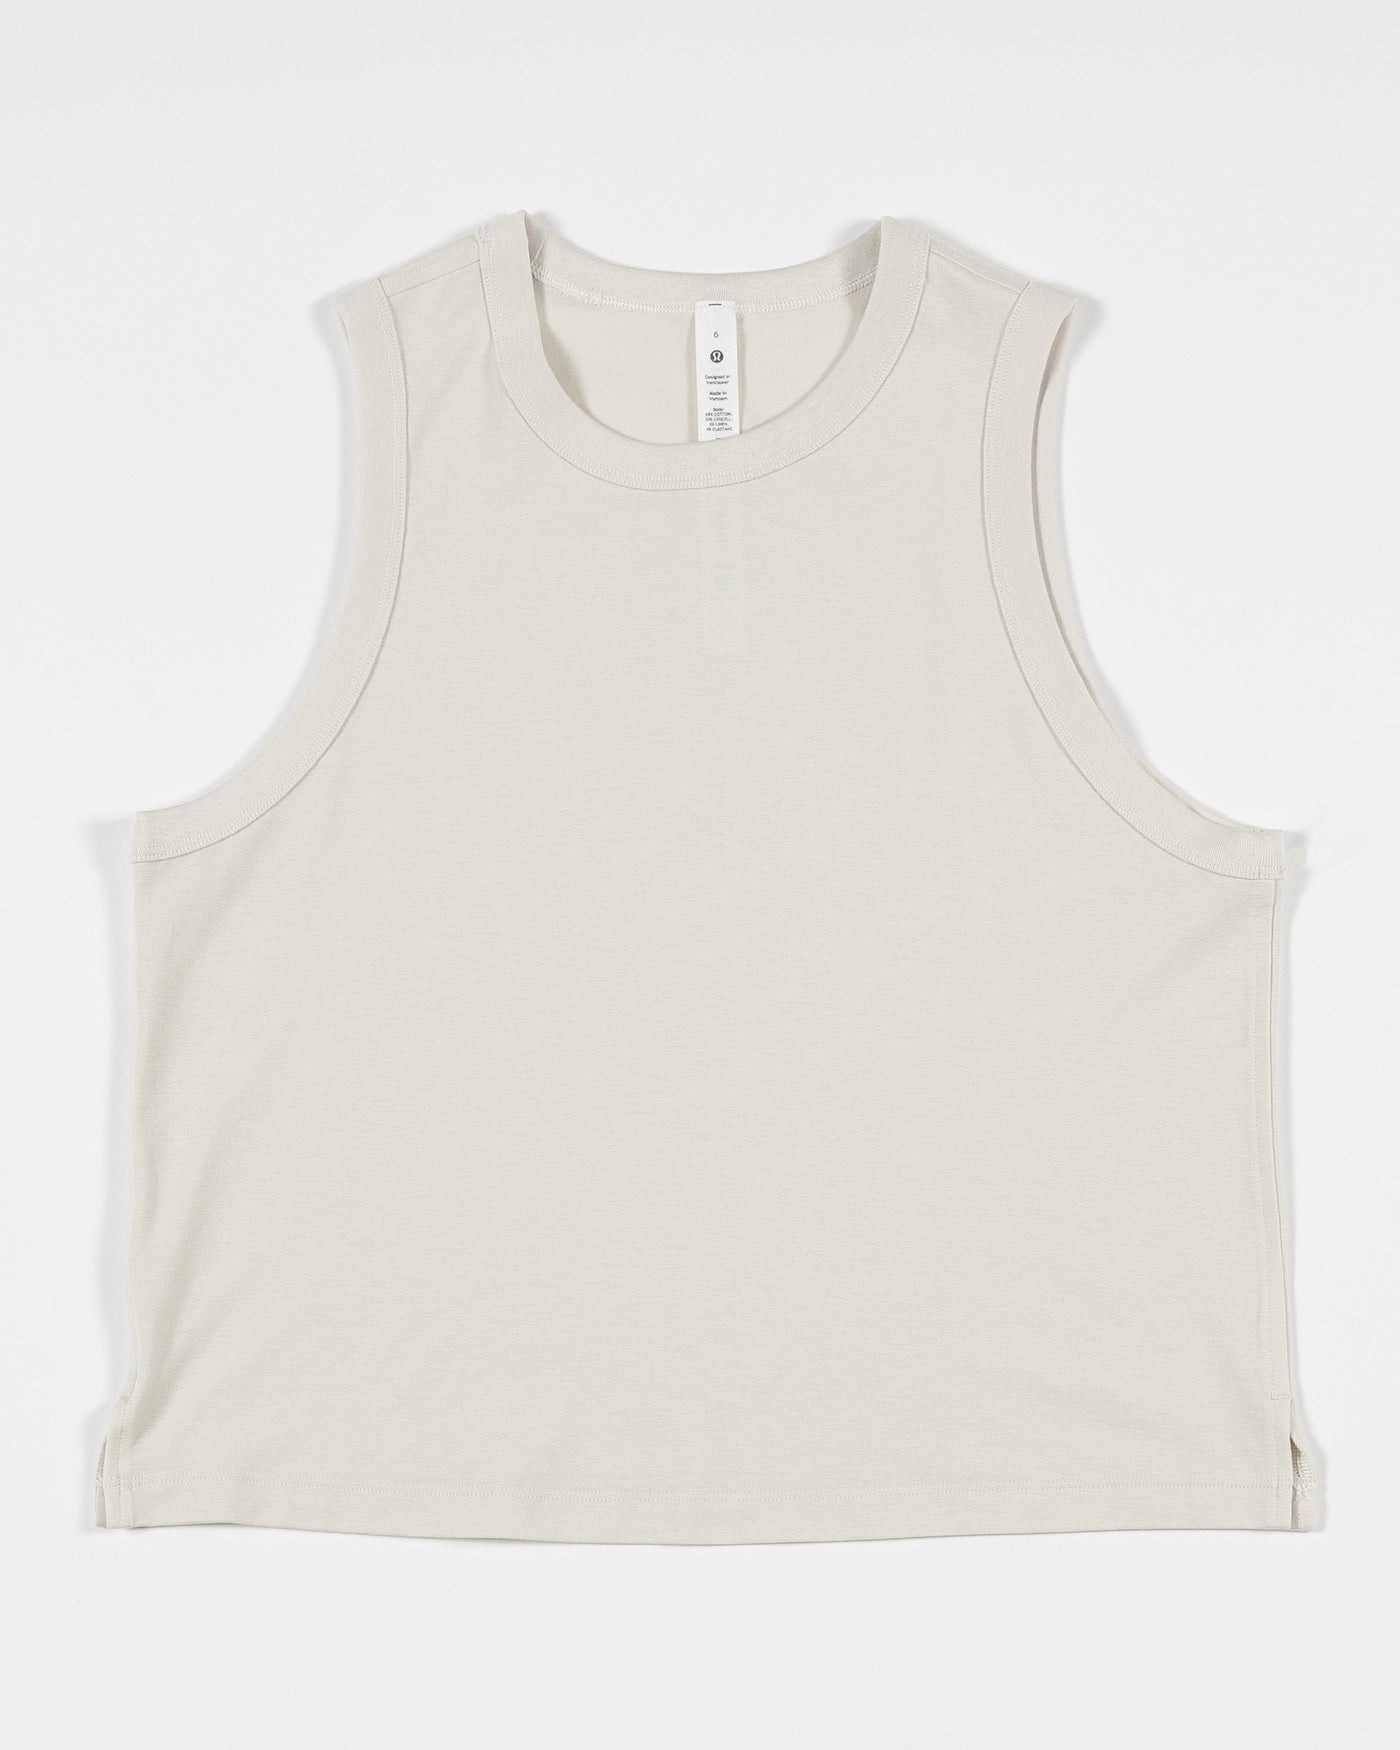 off white lululemon tank top with Chicago Blackhawks primary logo on back - front lay flat